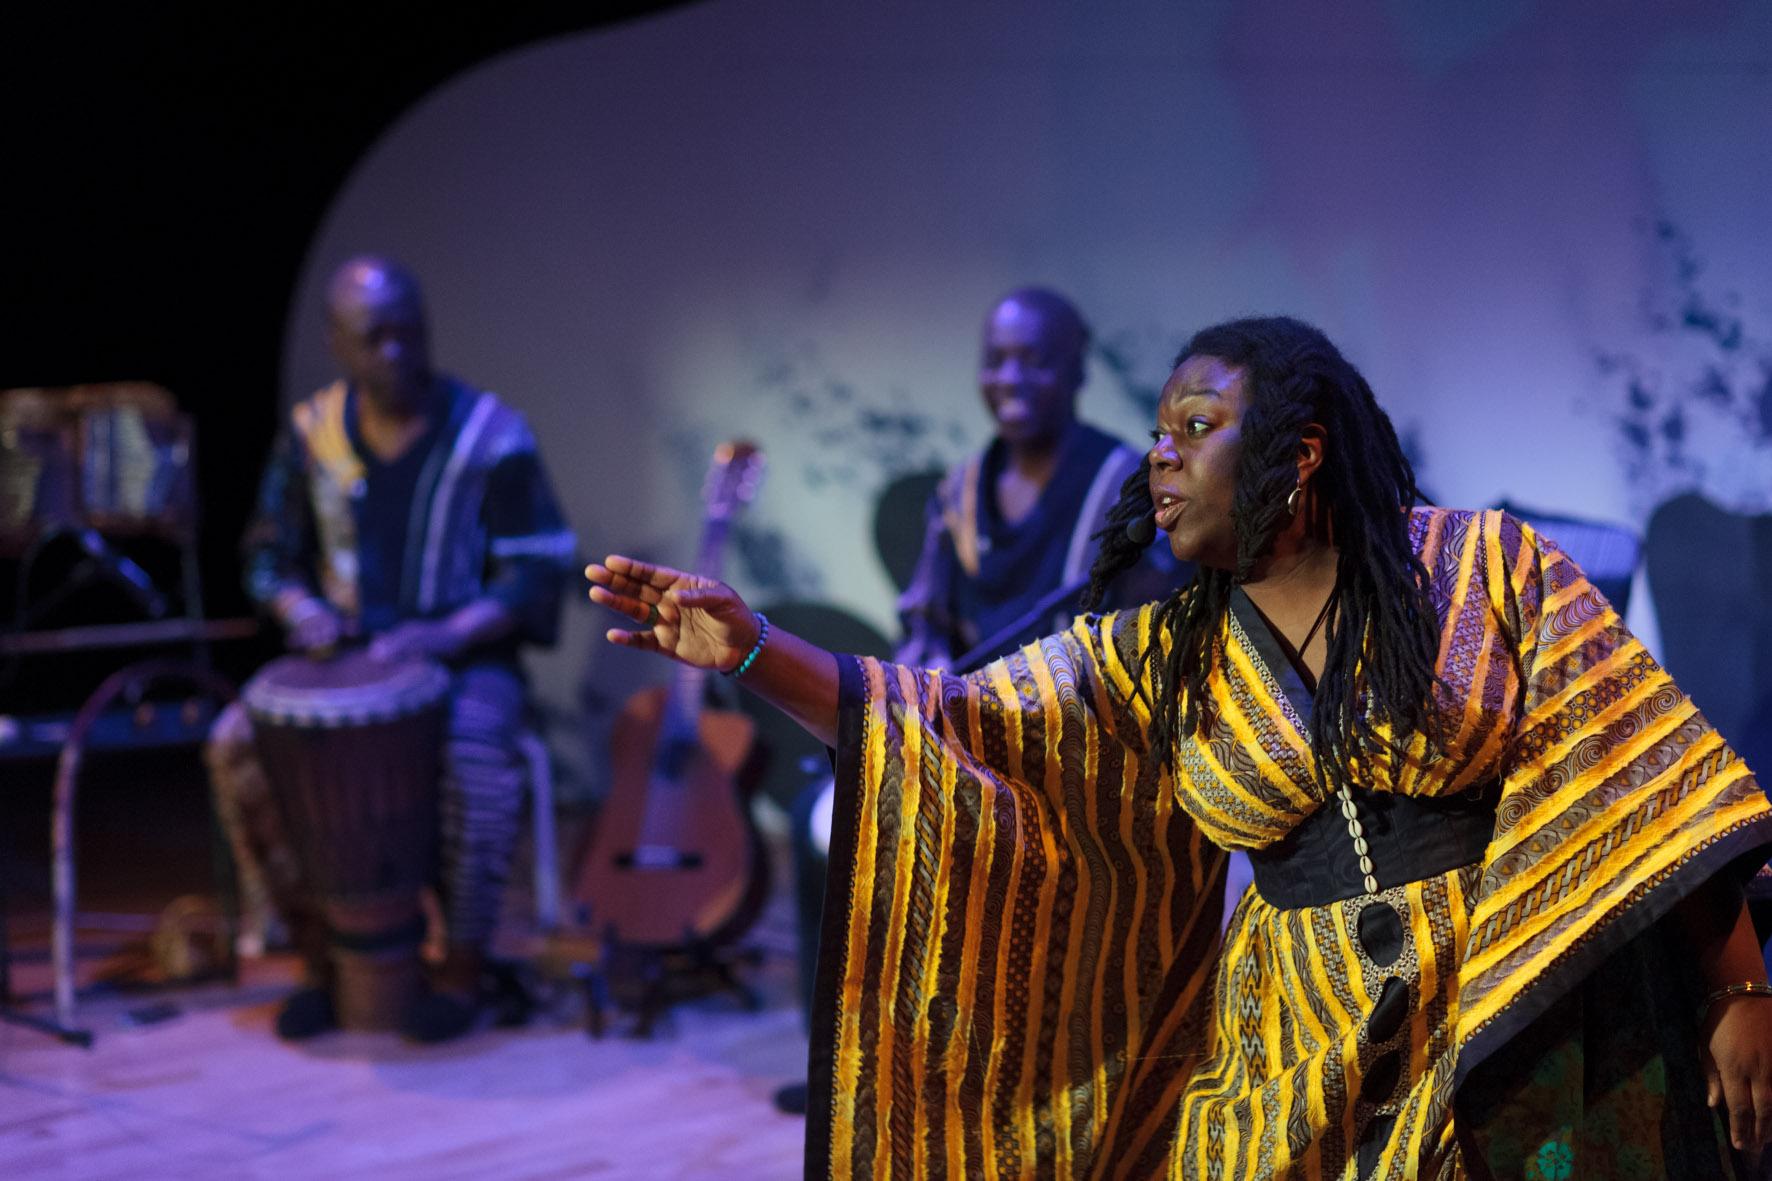 storyteller Jan Blake wearing a gold and yellow costume stretches out her hand, musicians Raymond & Kouame Sereba can be seen in the background